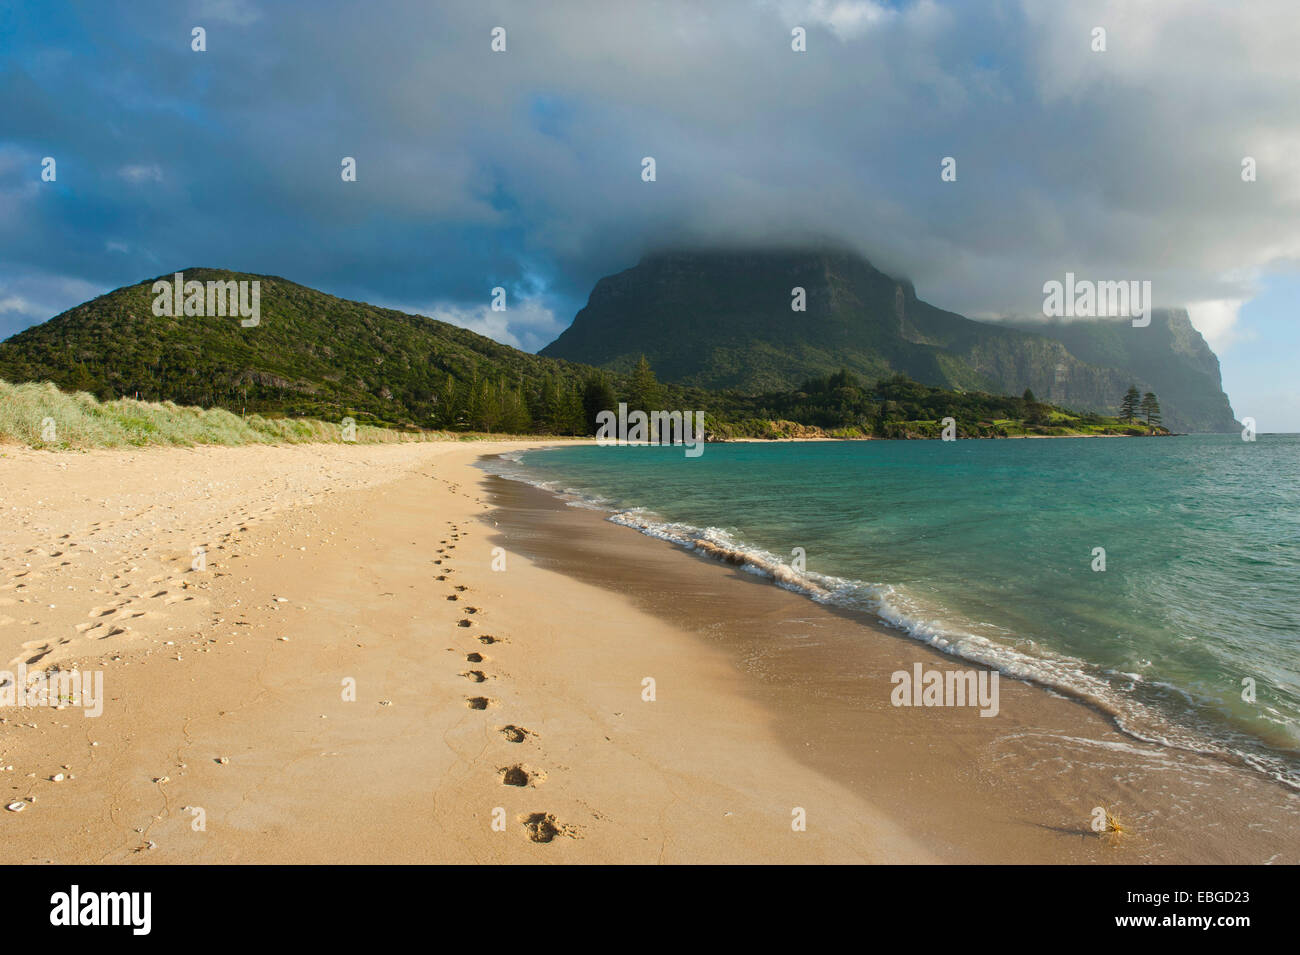 Deserted beach with Mount Lidgbird and Mount Gower at the back, Lord Howe Island, New South Wales, Australia Stock Photo